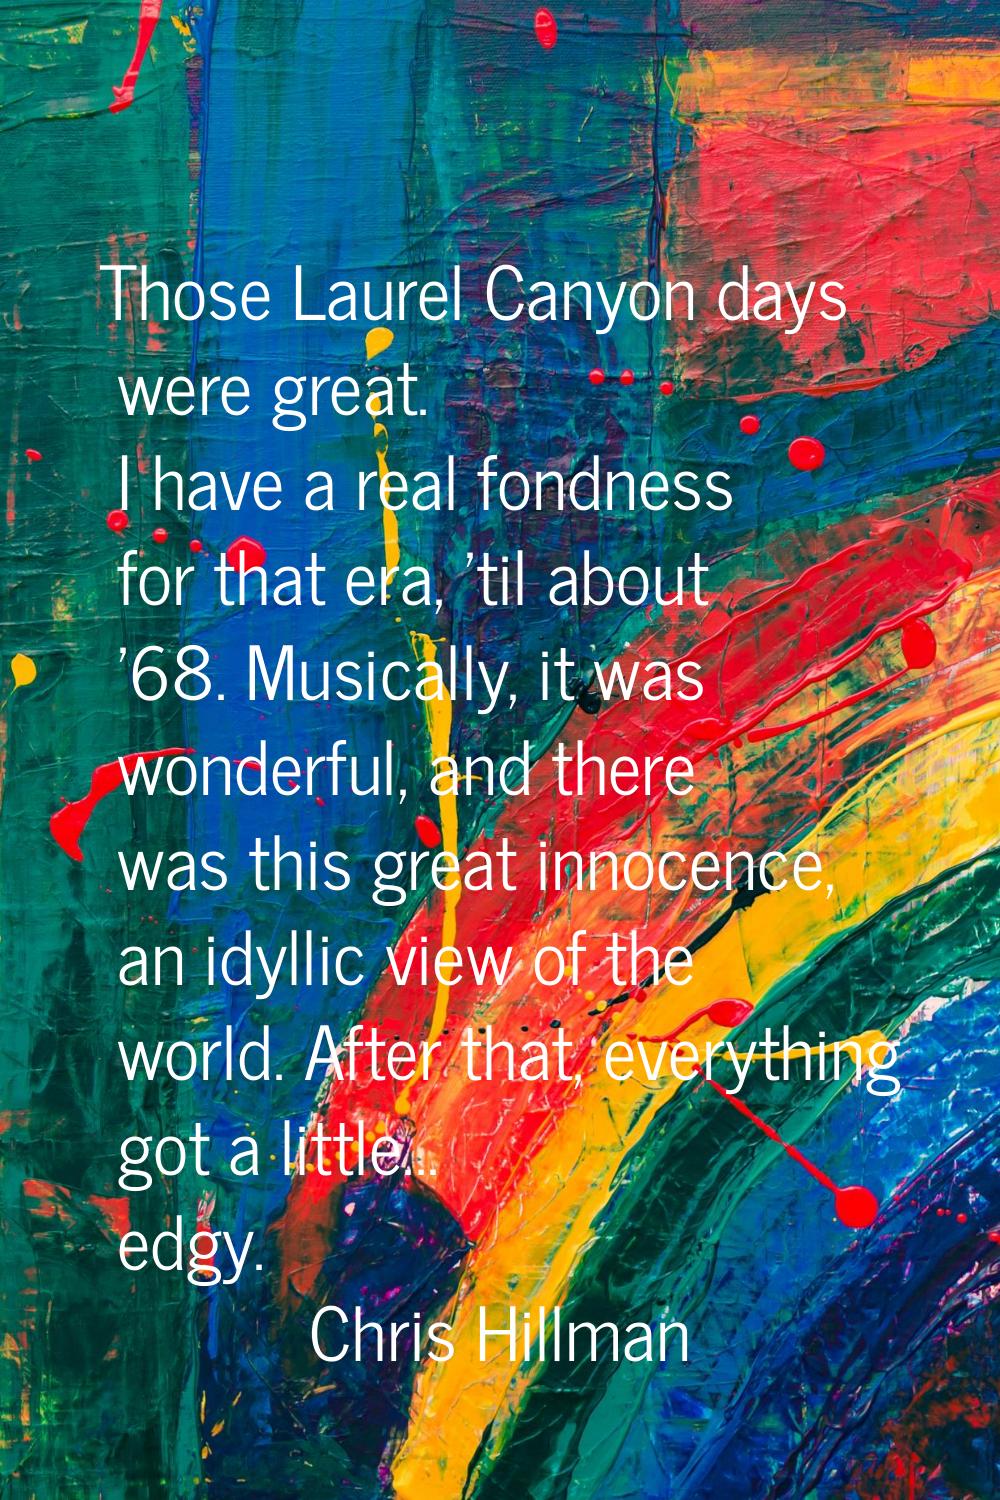 Those Laurel Canyon days were great. I have a real fondness for that era, 'til about '68. Musically